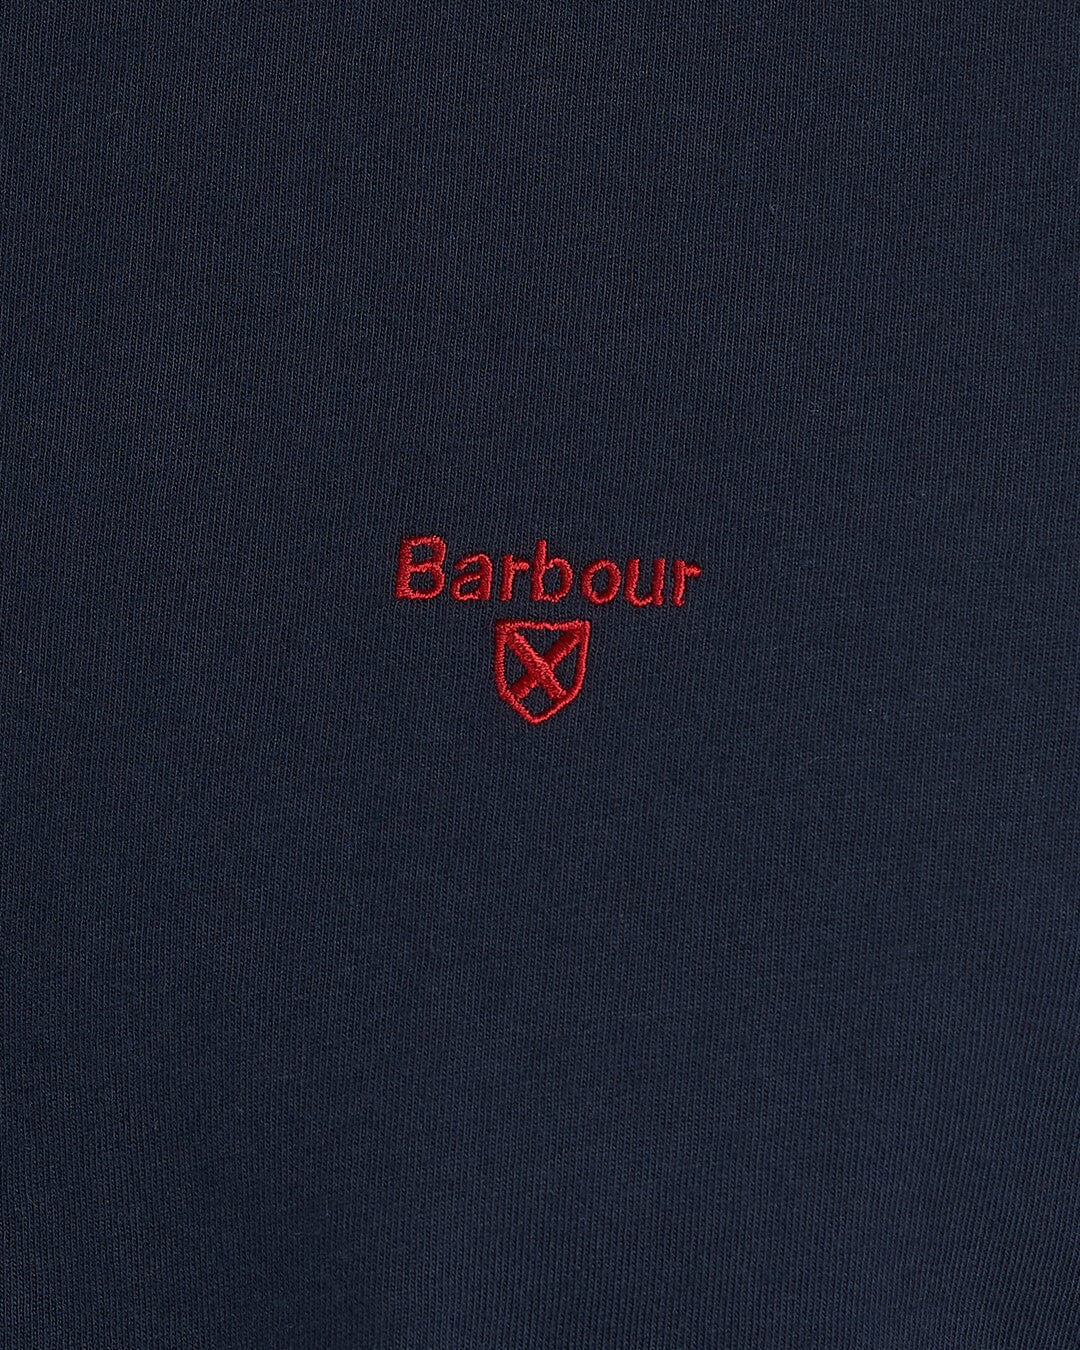 Barbour T-Shirts Barbour Navy Essential Sports T-Shirt